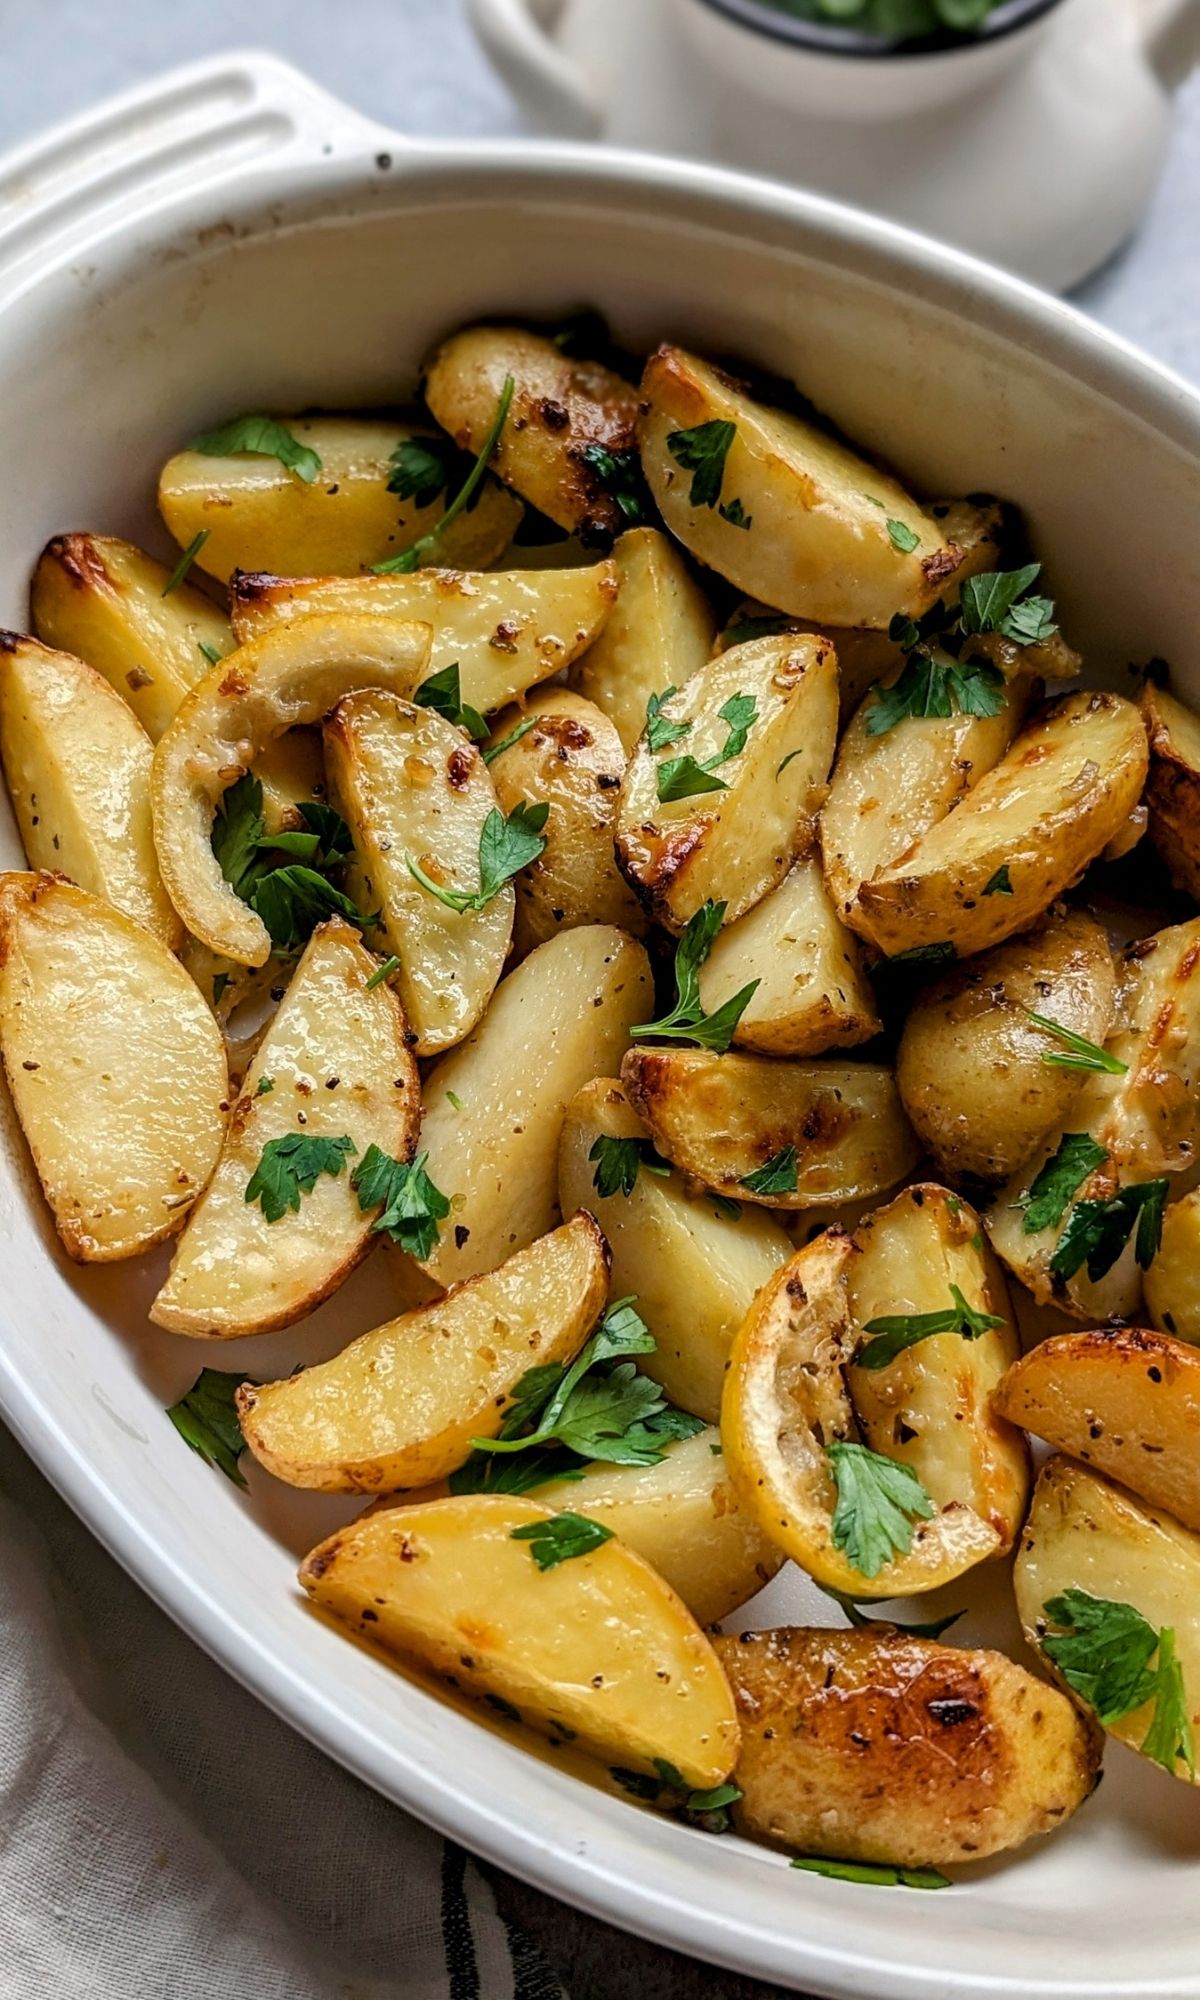 low sodium roasted potatoes with lemon easy potato recipes with no salt added potatoes with lemons and herbs.